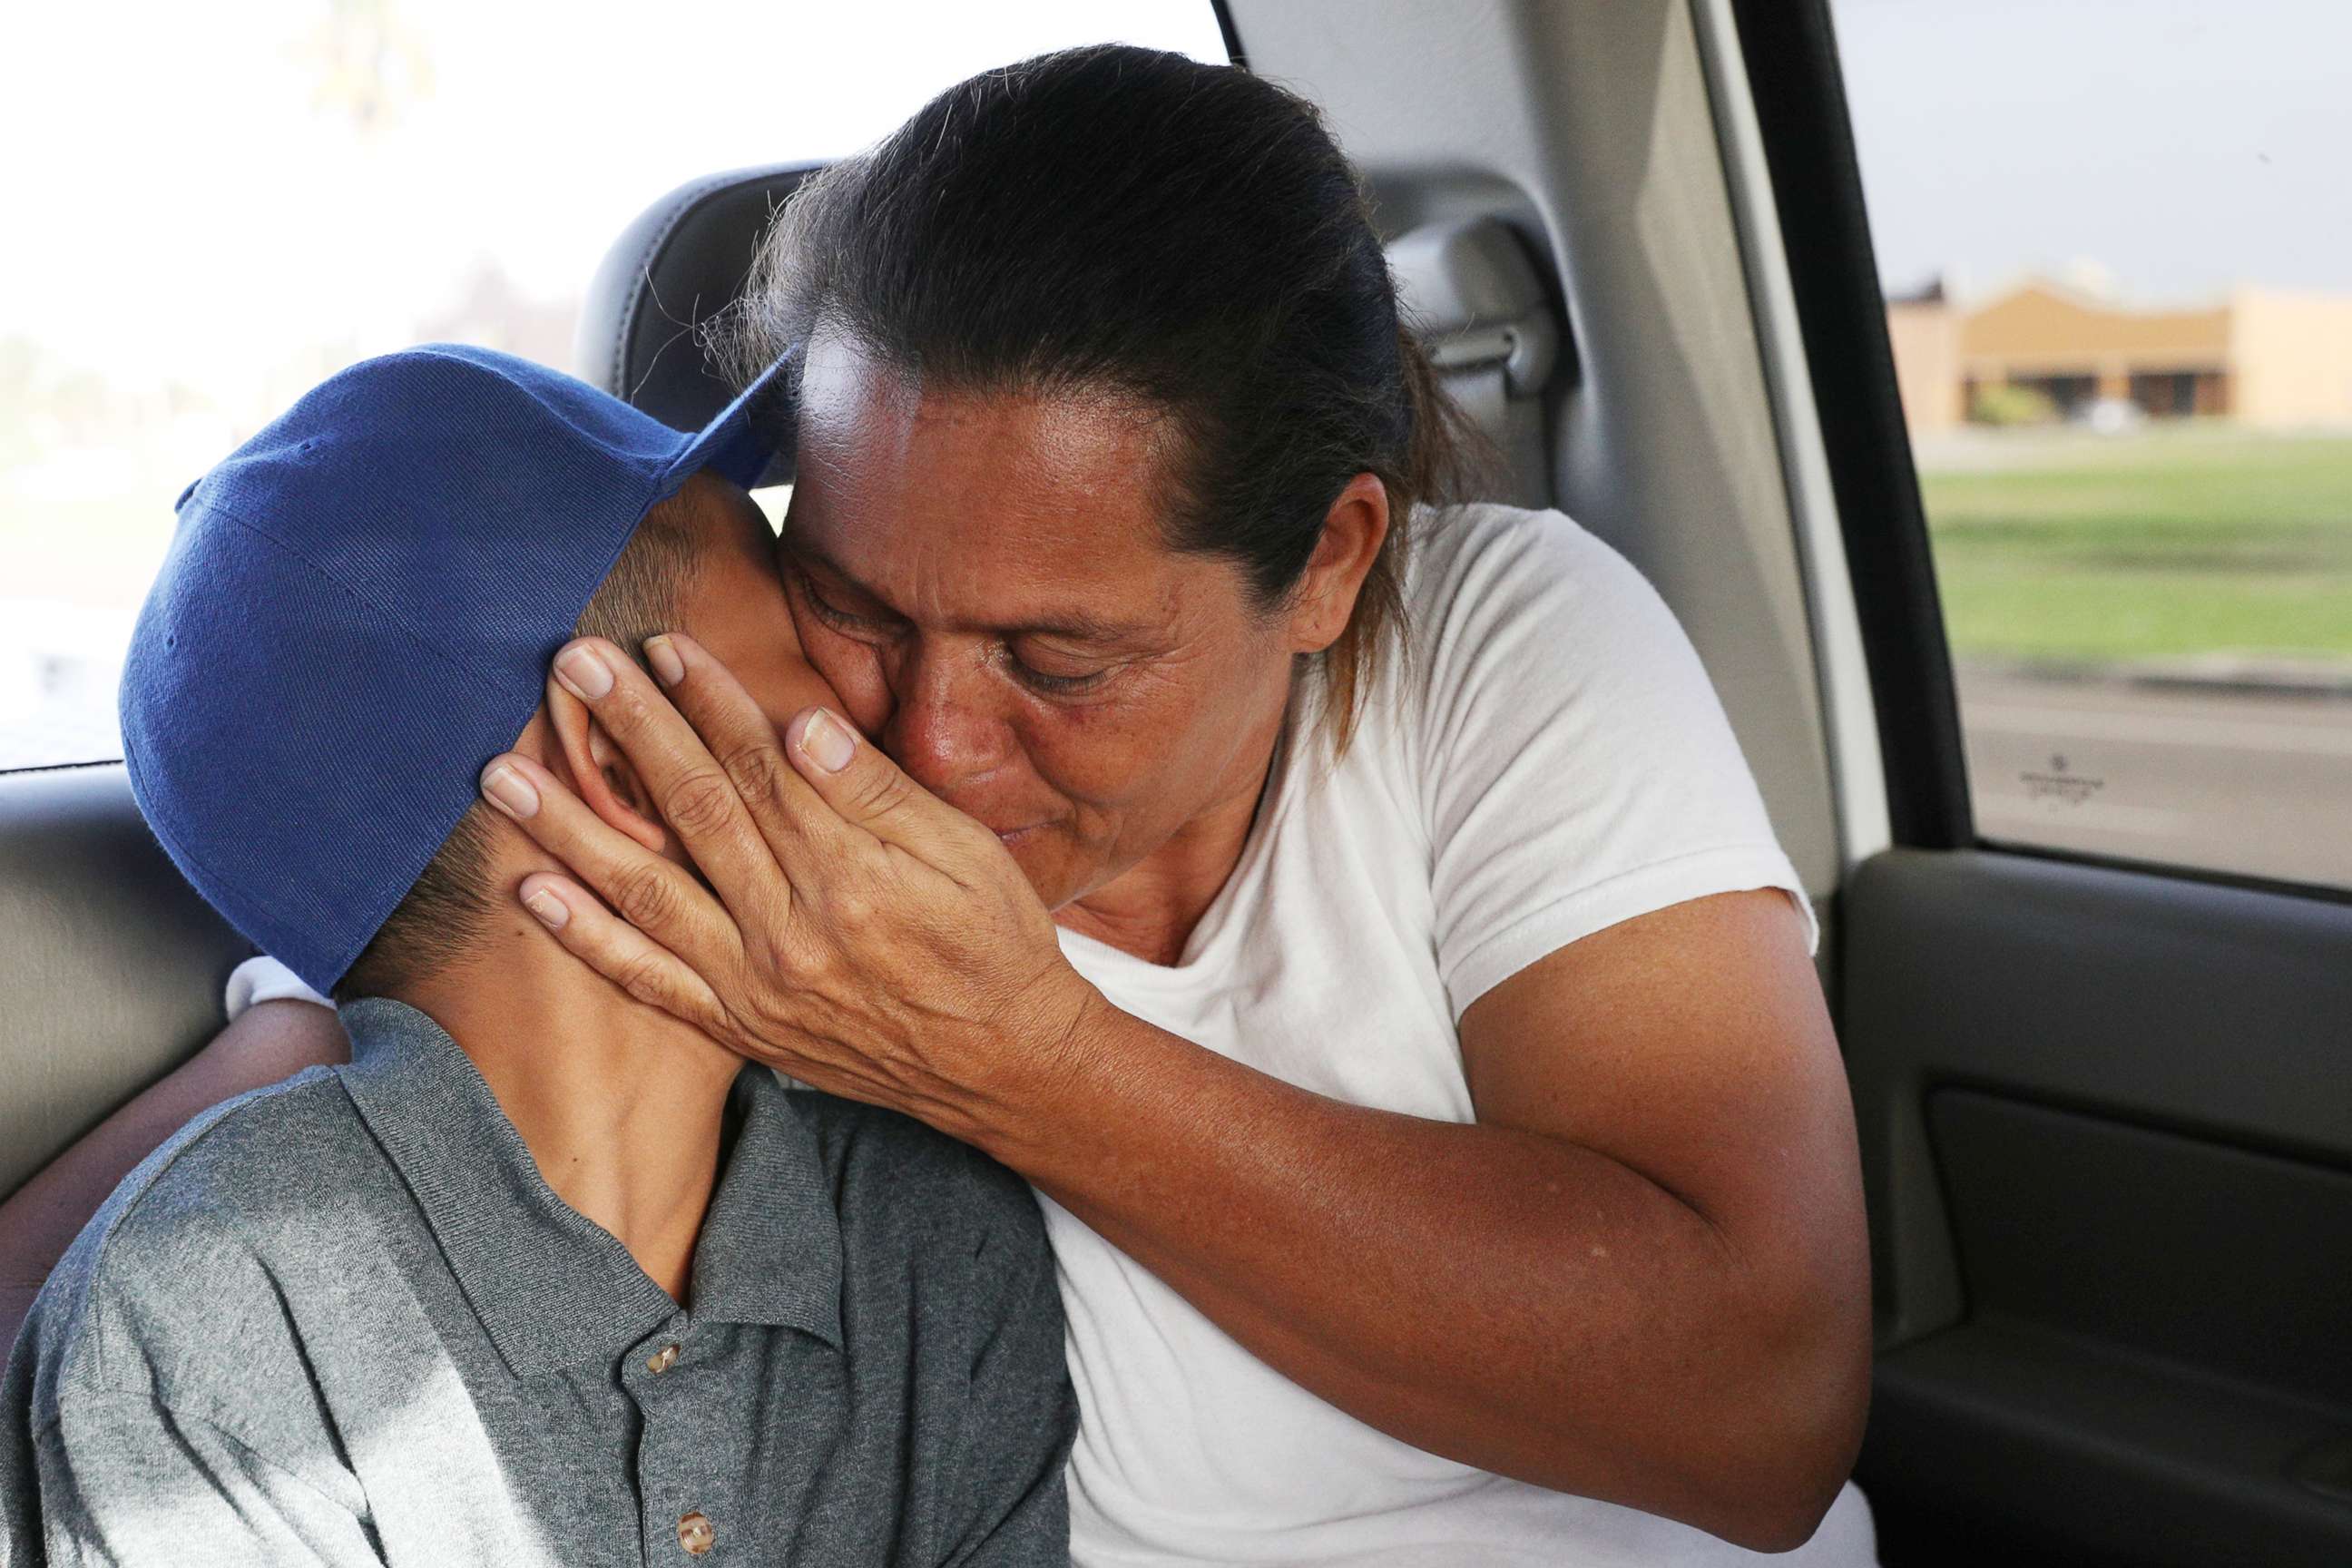 PHOTO: Maria Marroquin Perdomo and her 11-year-old son Abisai drive away from the Casa Padre facility in the backseat of her attorney's truck minutes after mother and son were reunited in Brownsville, Texas, July 14, 2018.